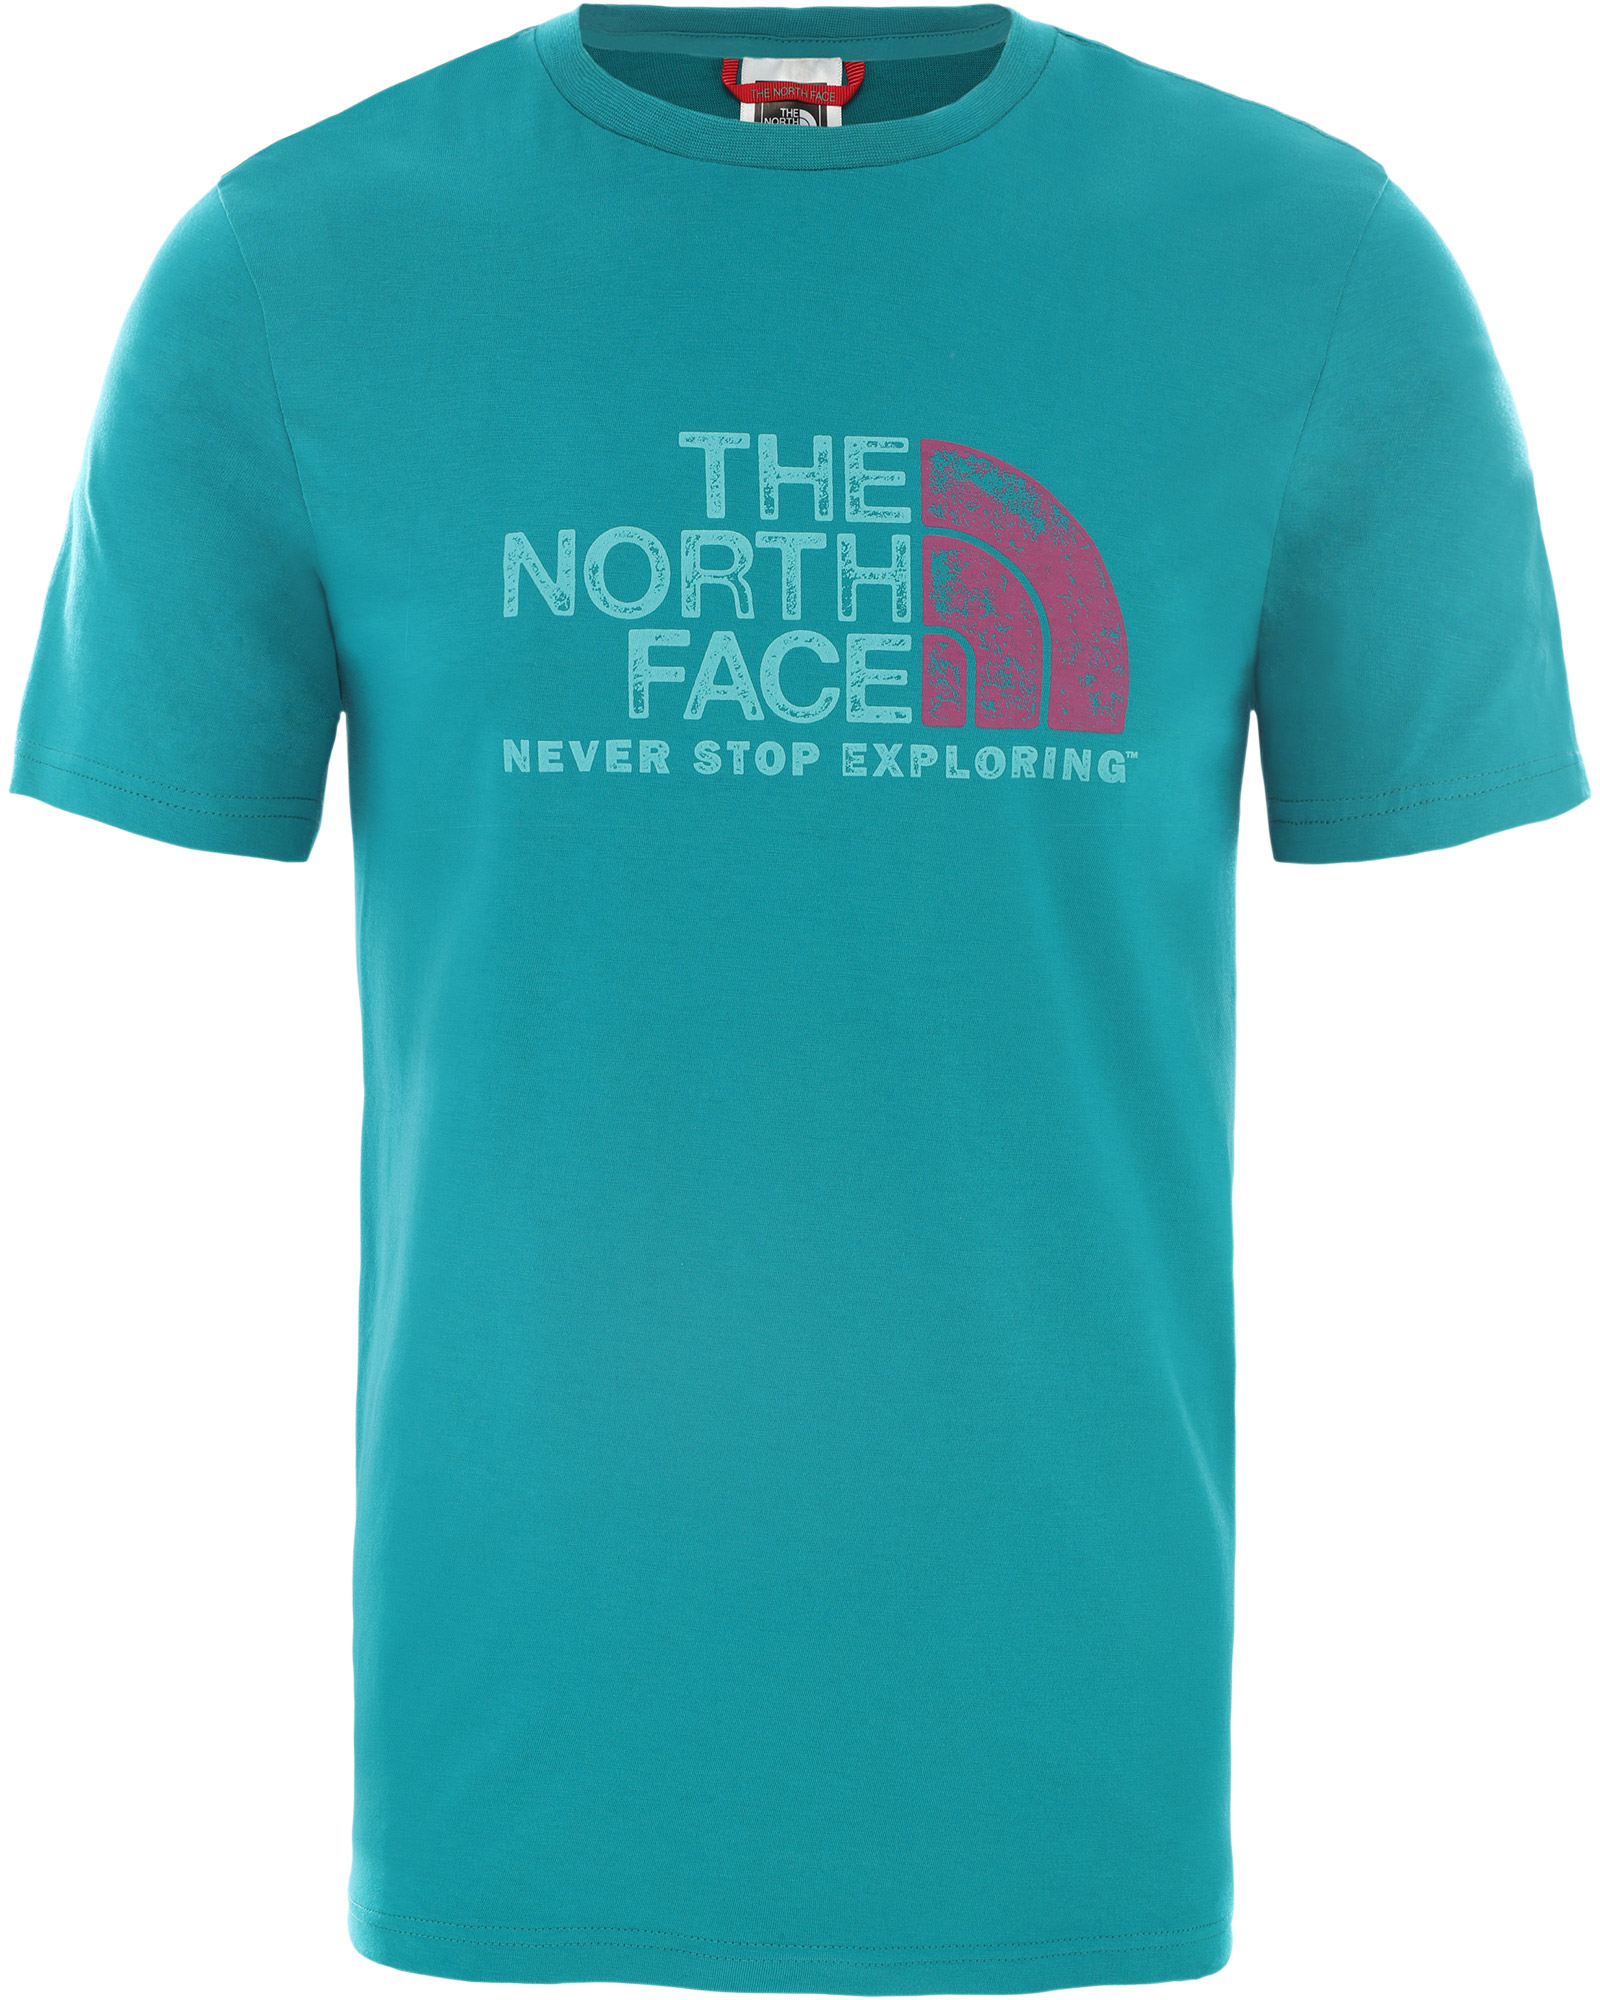 The North Face Rust Men’s T Shirt - Fanfare Green S